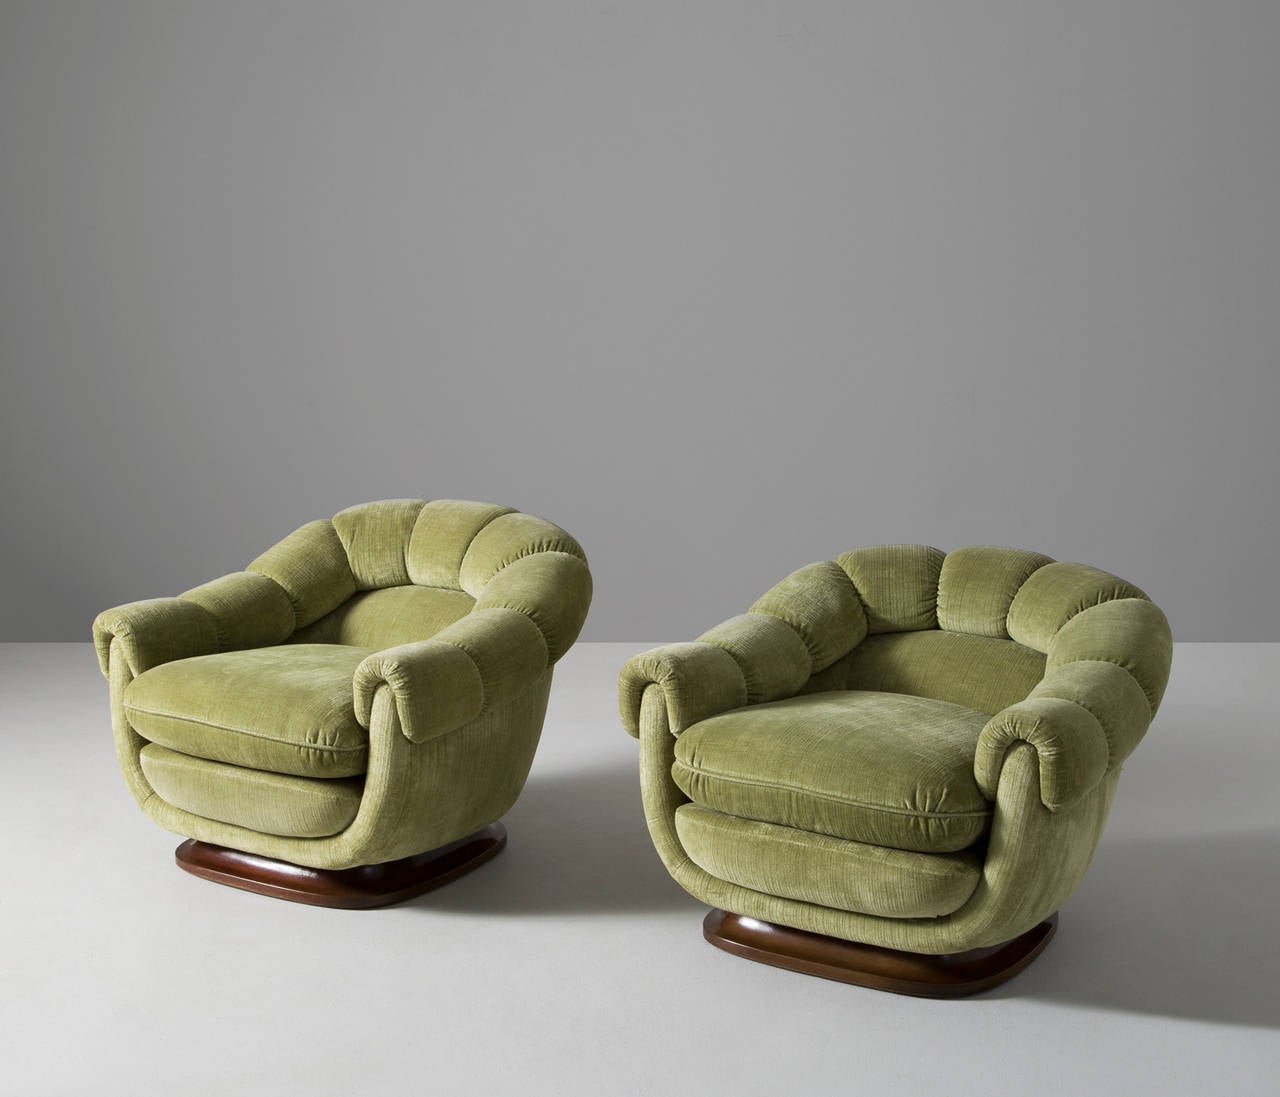 Two elegant club chairs with round shapes

This set is gently curved and shows a variety of well designed round shapes and a decorative closed wooden base, which provides the sofa with a solid yet elegant look.

This set is upholstered in green